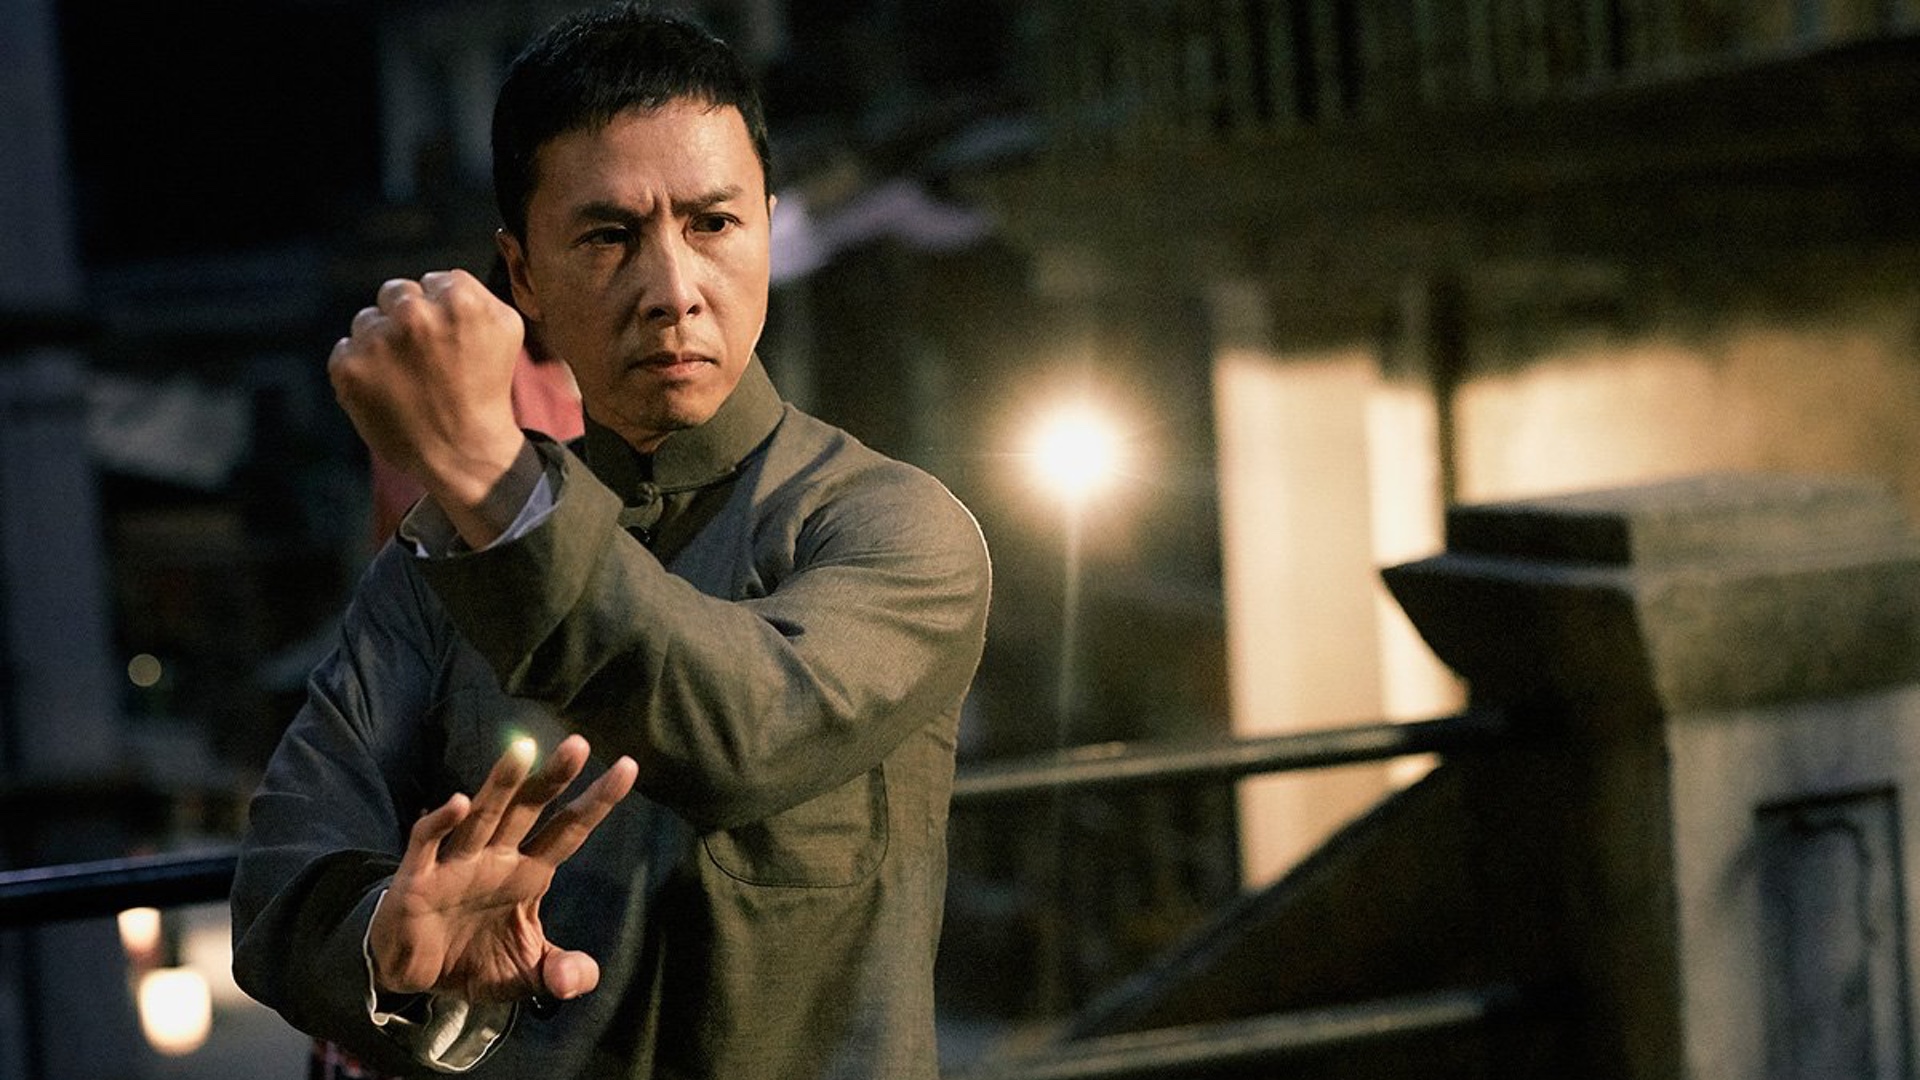 Donnie Yen reveals first 'Ip Man 4' trailer on Instagram and it looks really intense